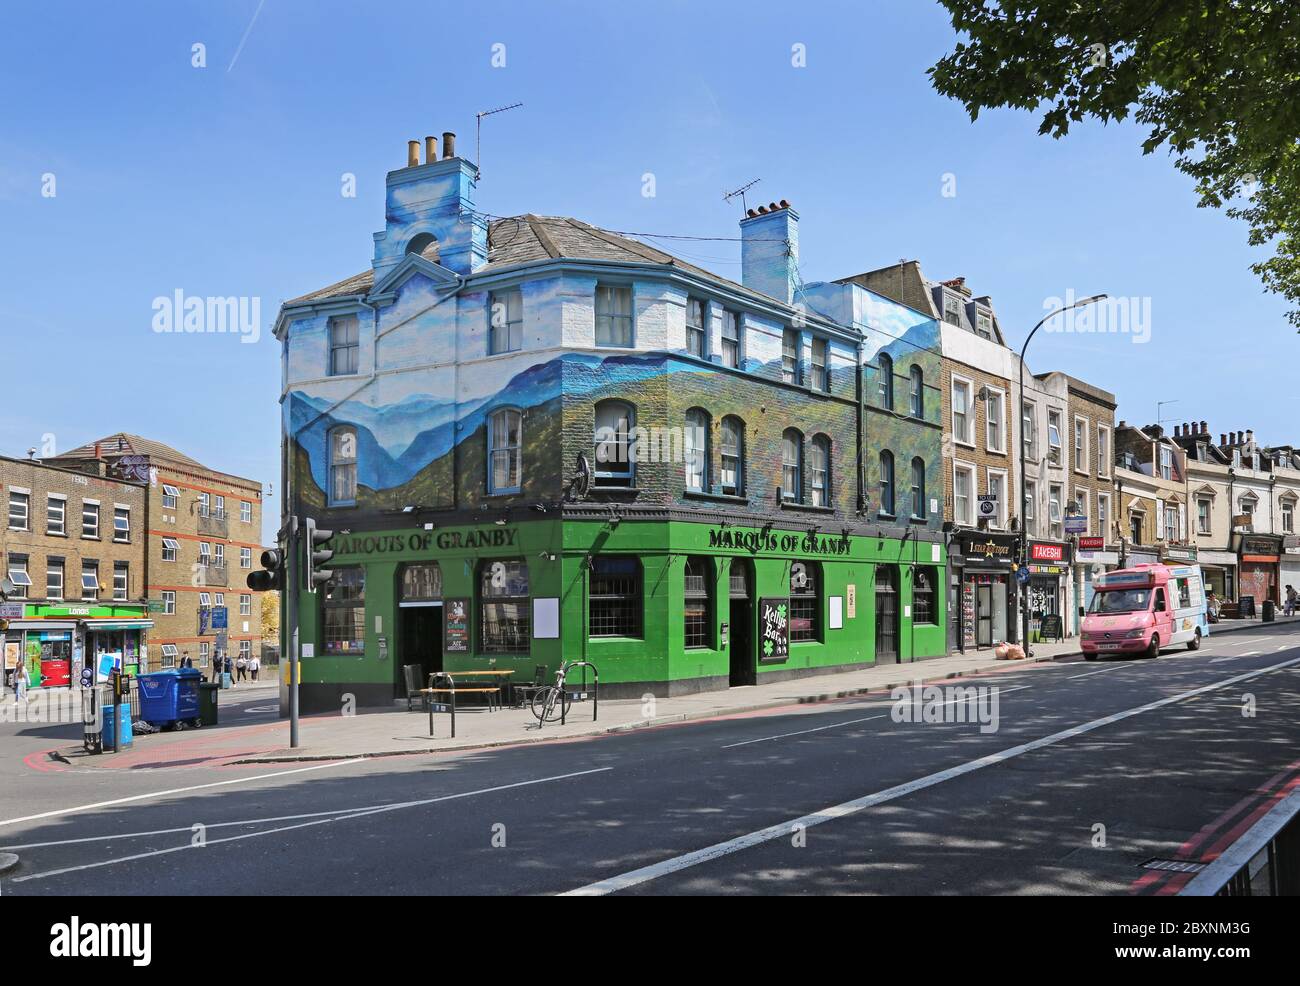 The Marquis of Granby pub on the one way system at New Cross Gate, souteast London UK. Junction of New Cross Road (A2) and Lewisham Way A(20) Stock Photo